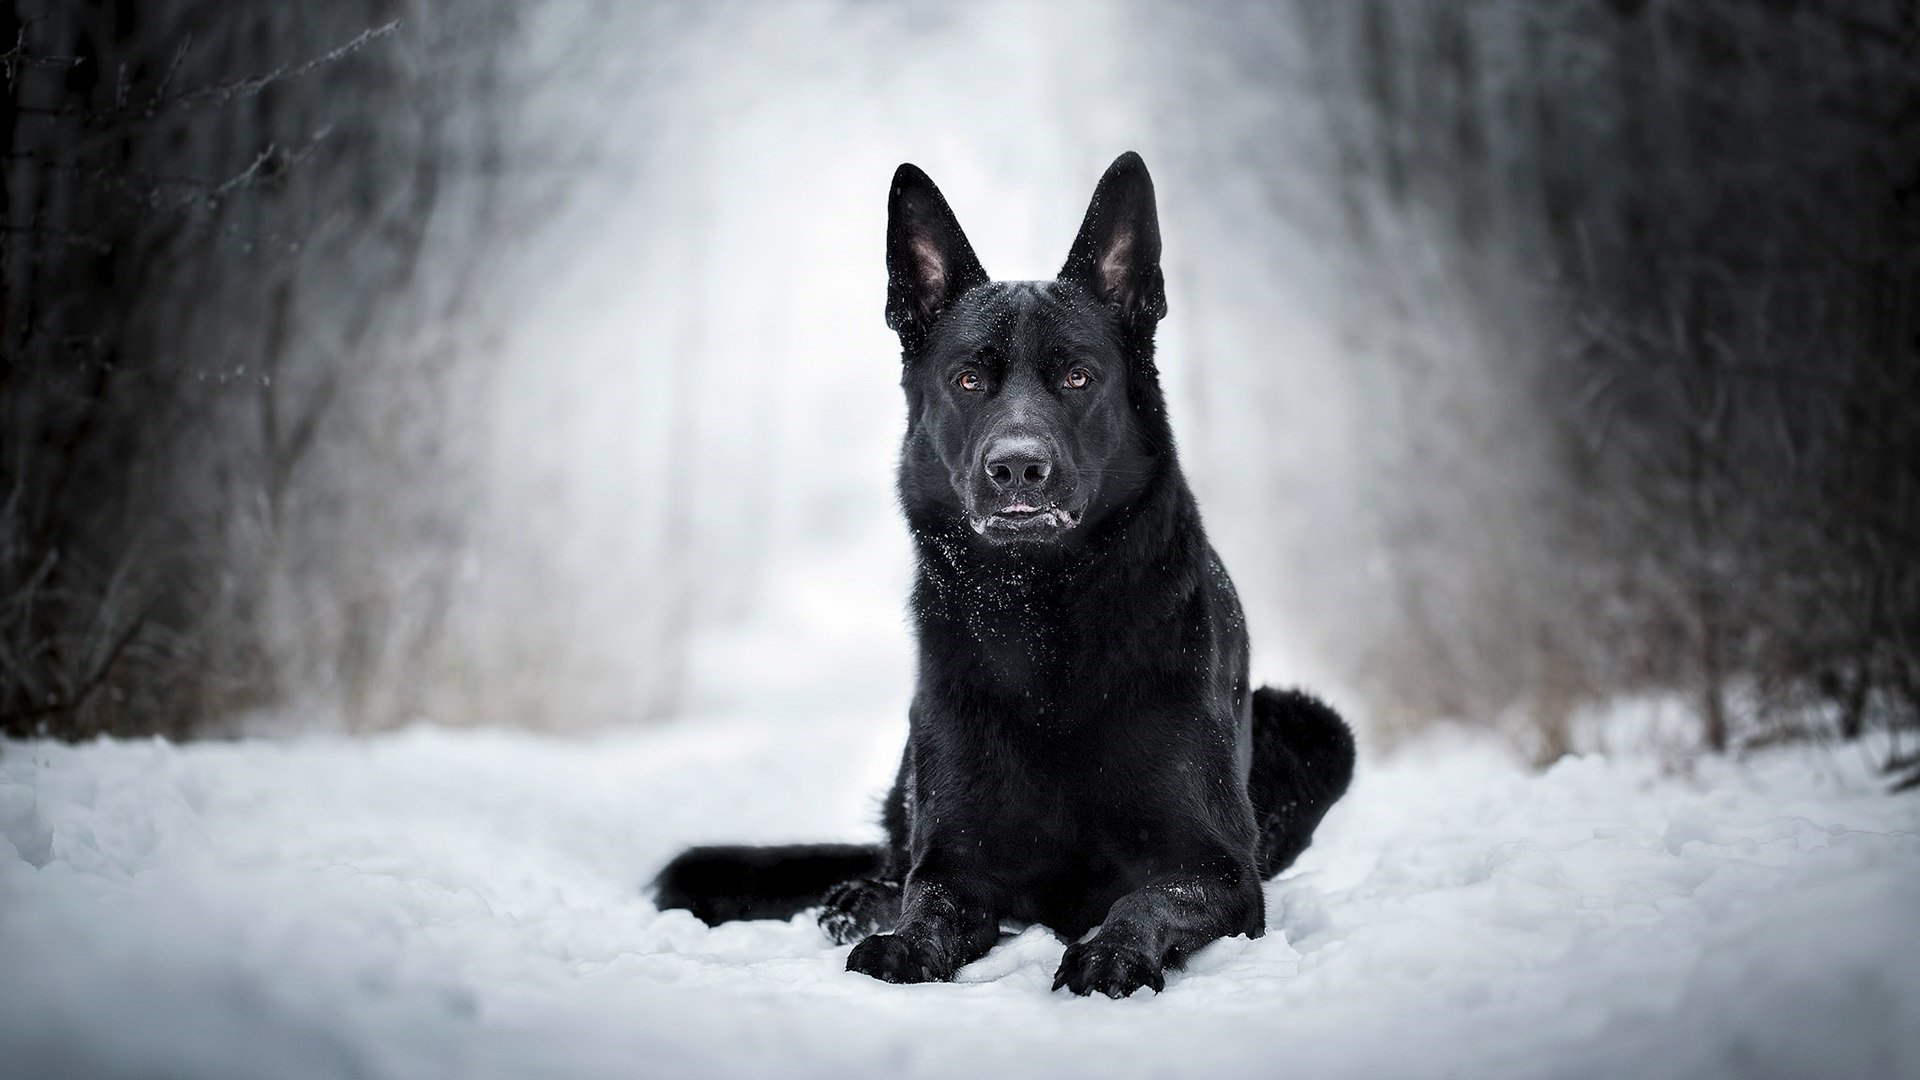 Black Dog in the Snow HD Wallpaper